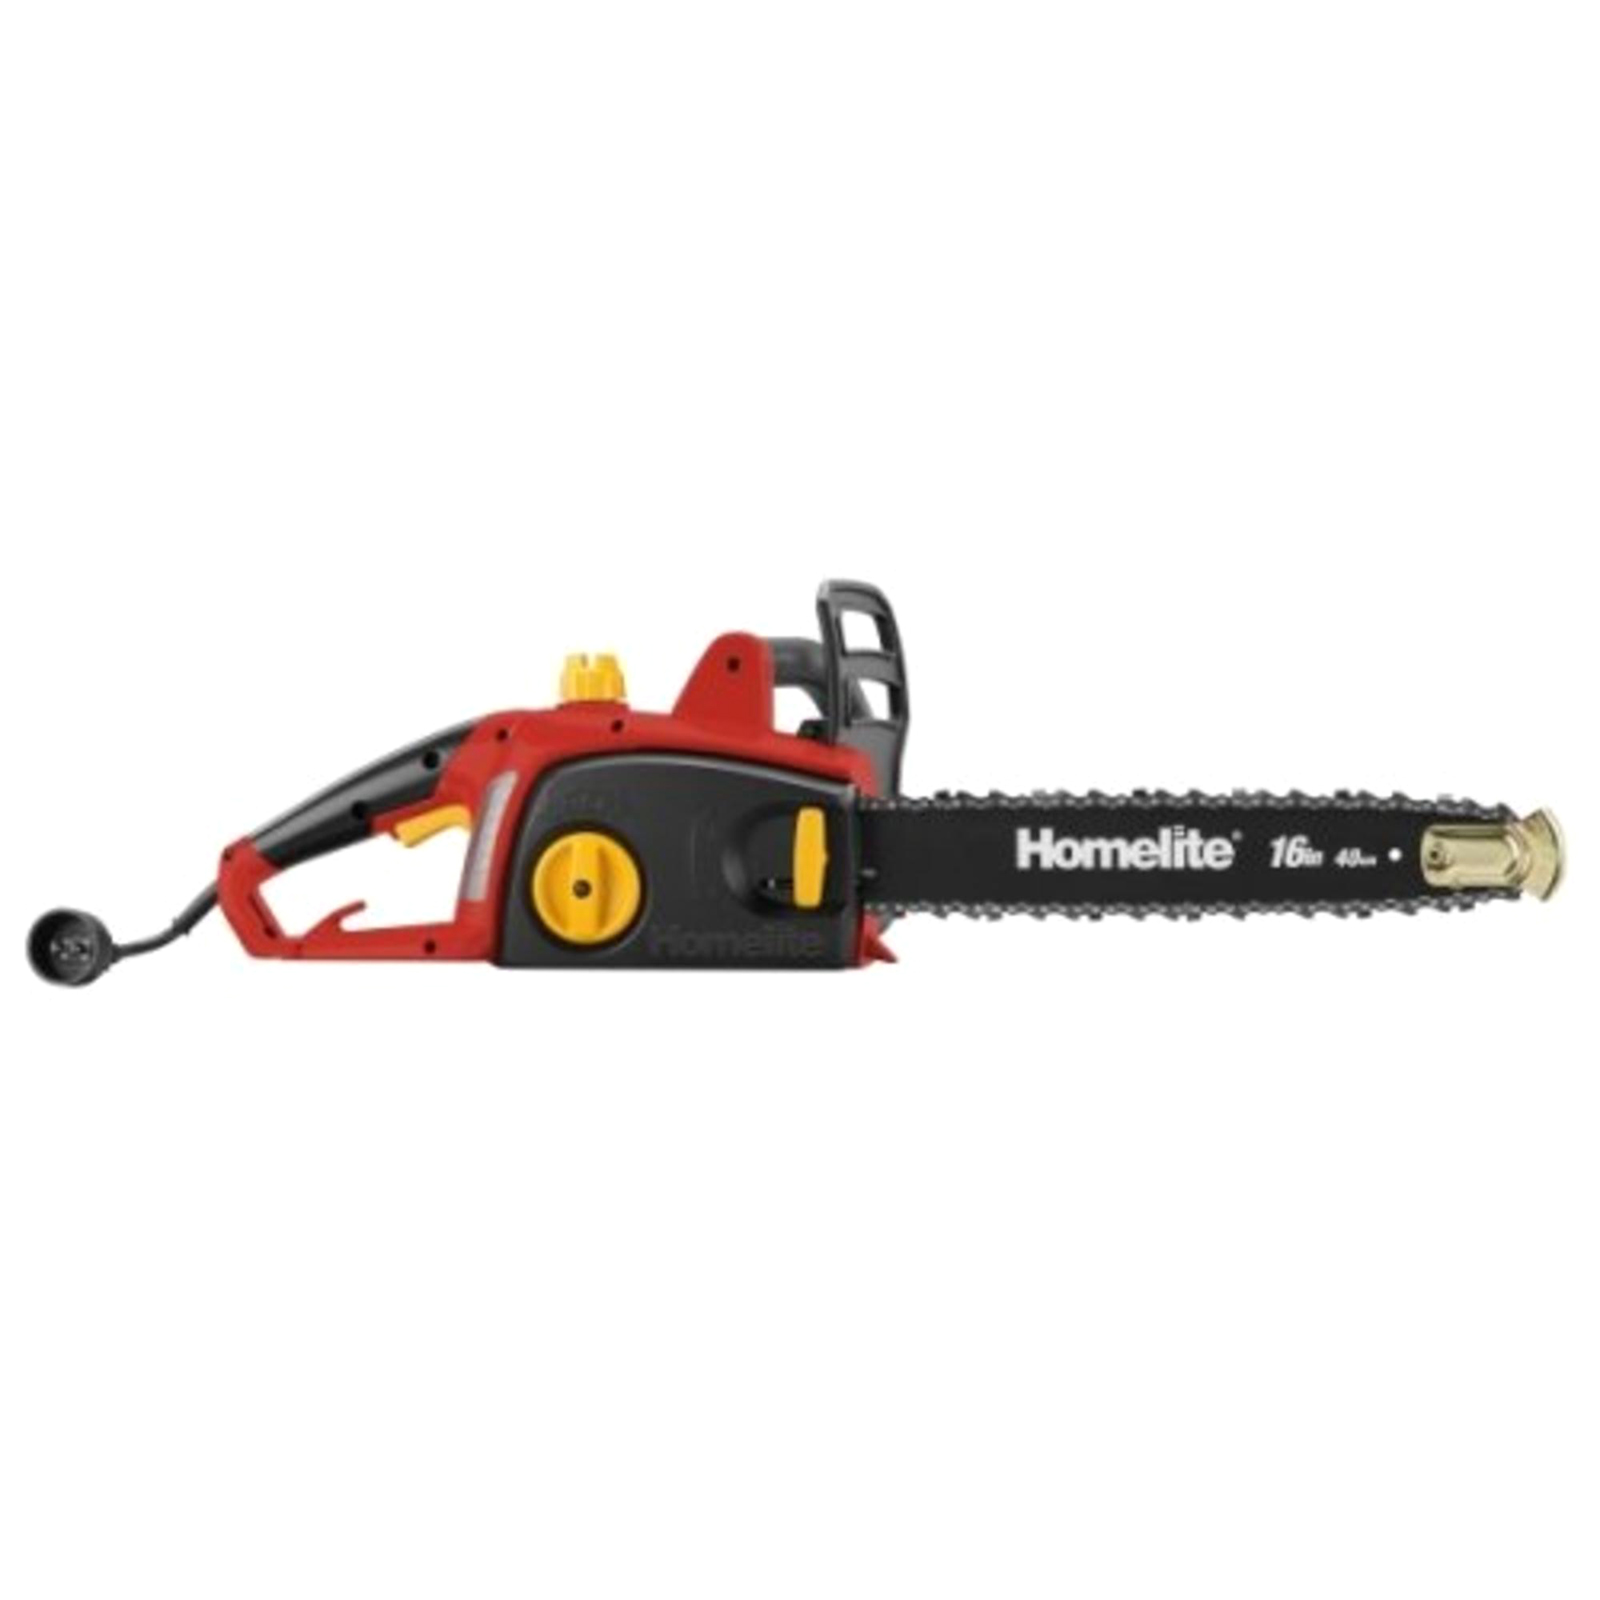 Homelite ZR43120 Factory-Reconditioned 12A Electric Chain Saw with Automatic Oiler